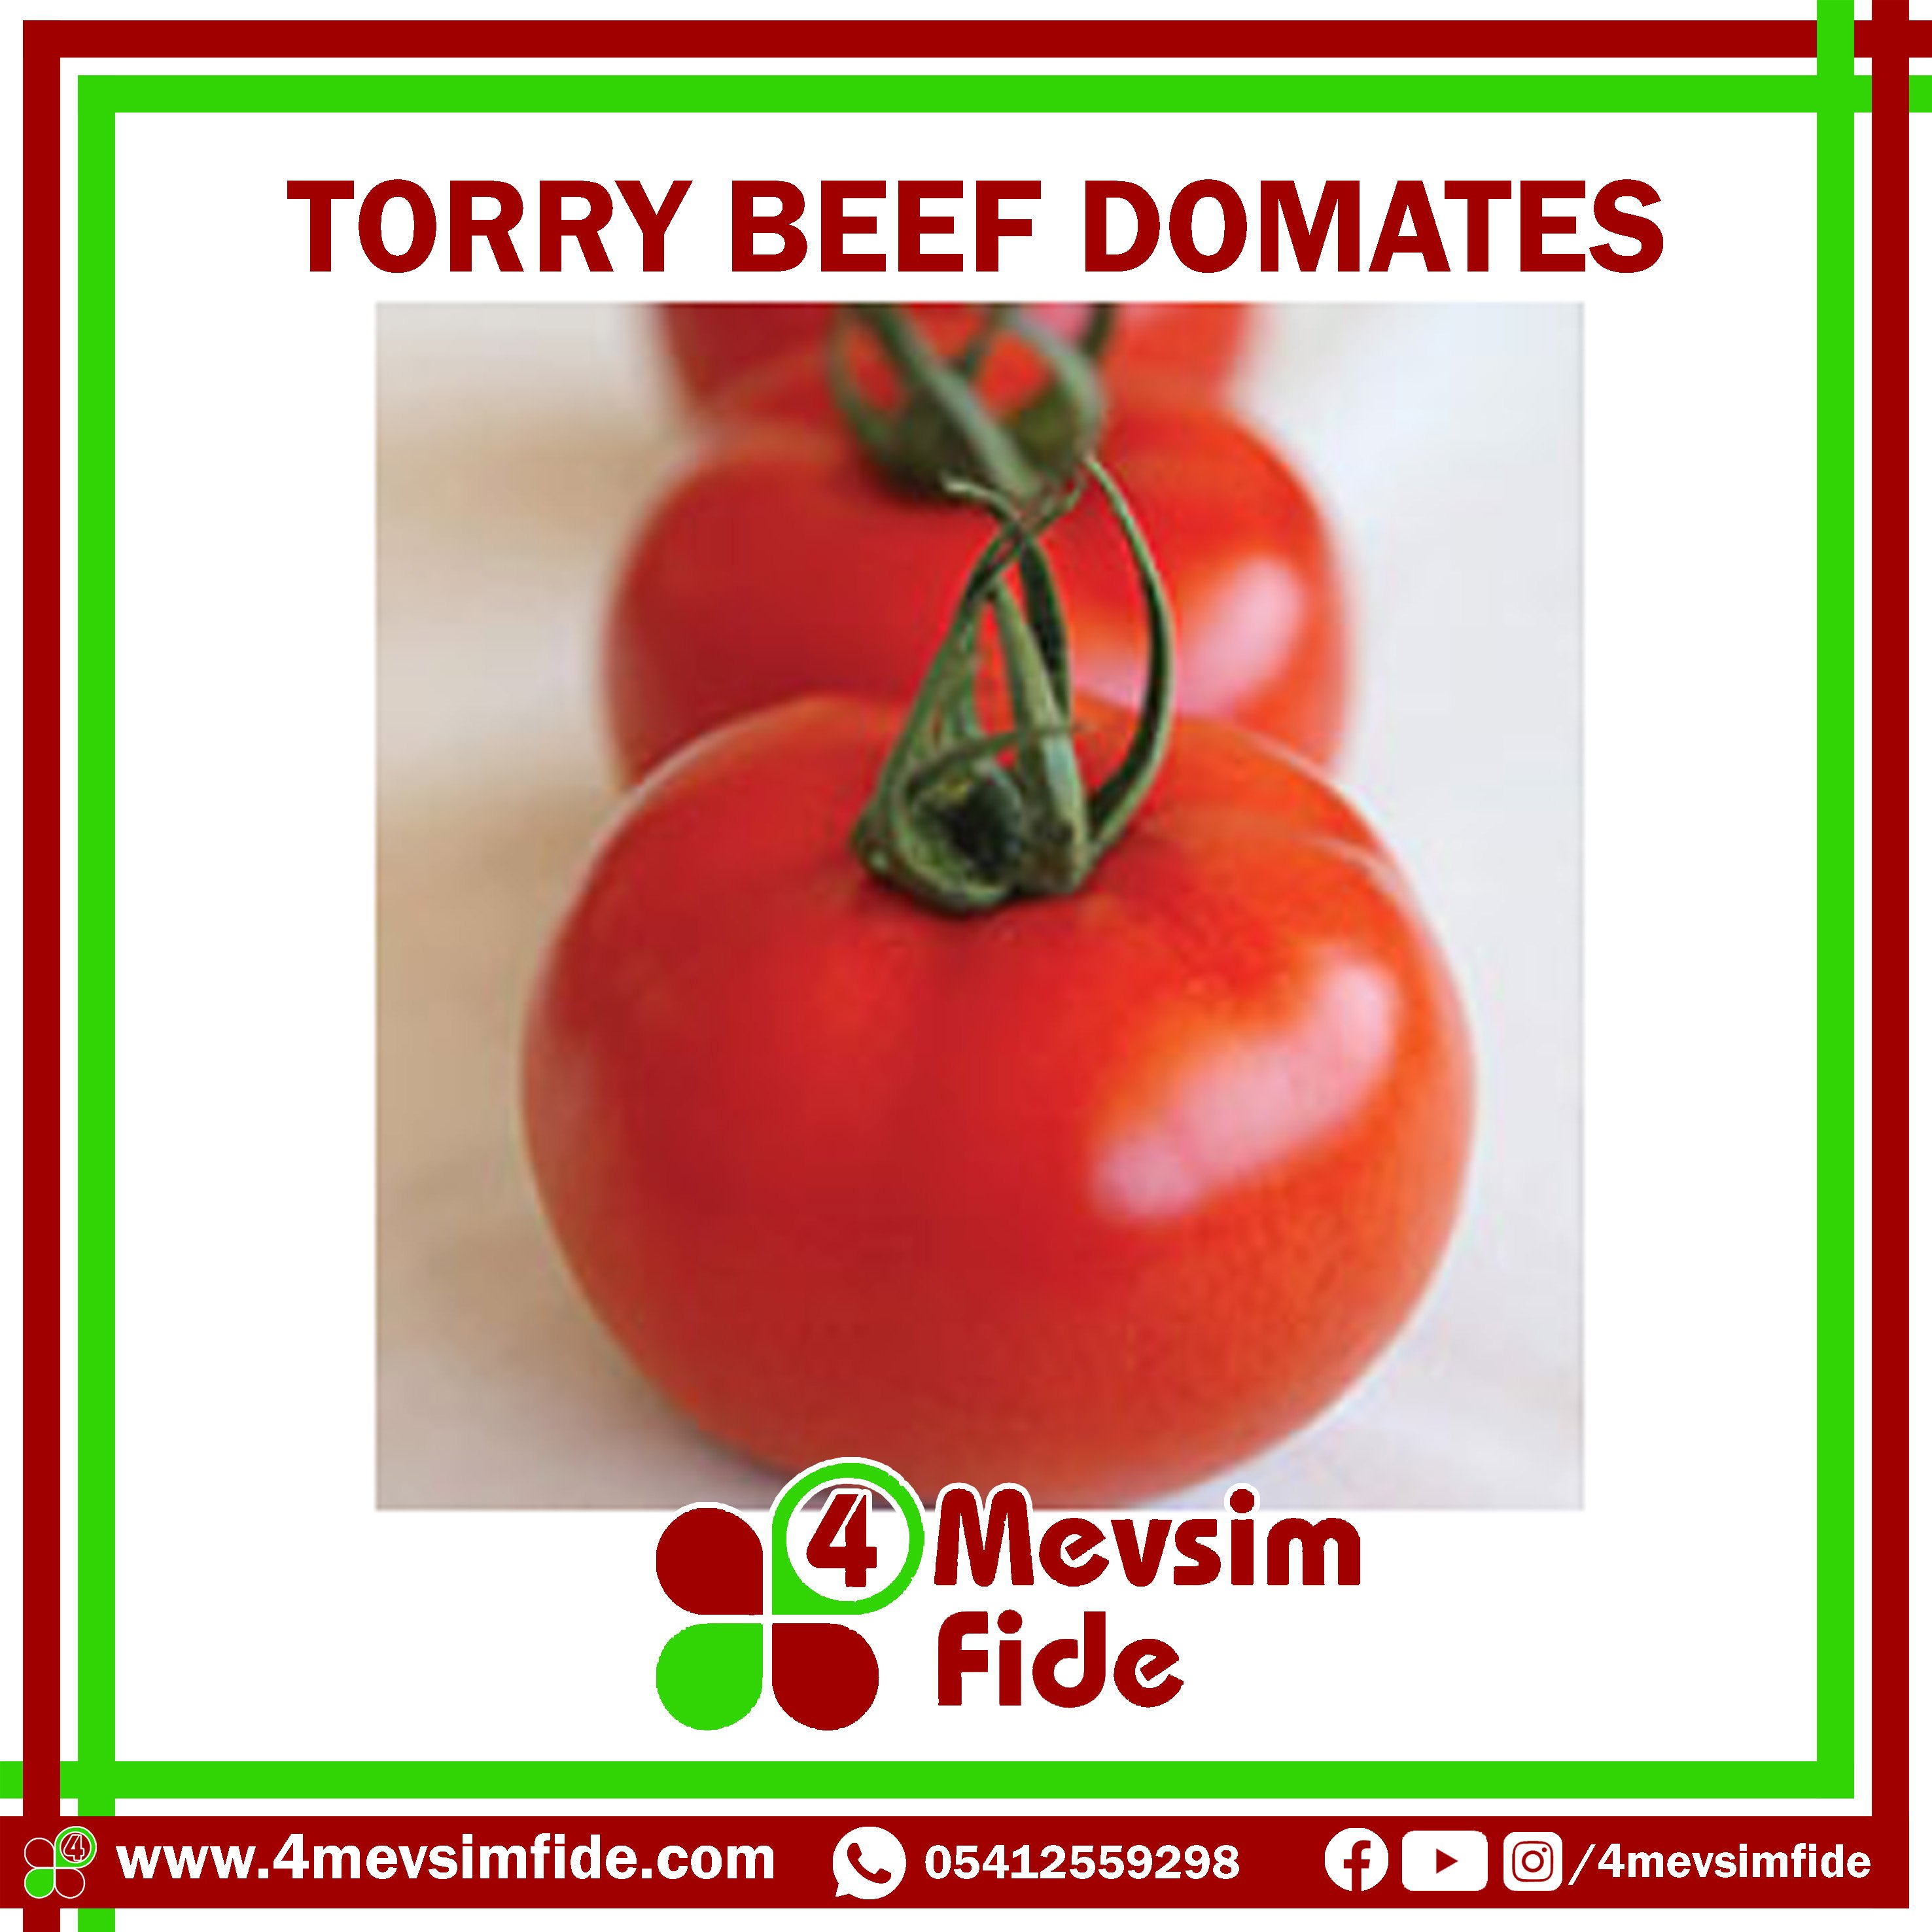 Torry F1 Beef Domates